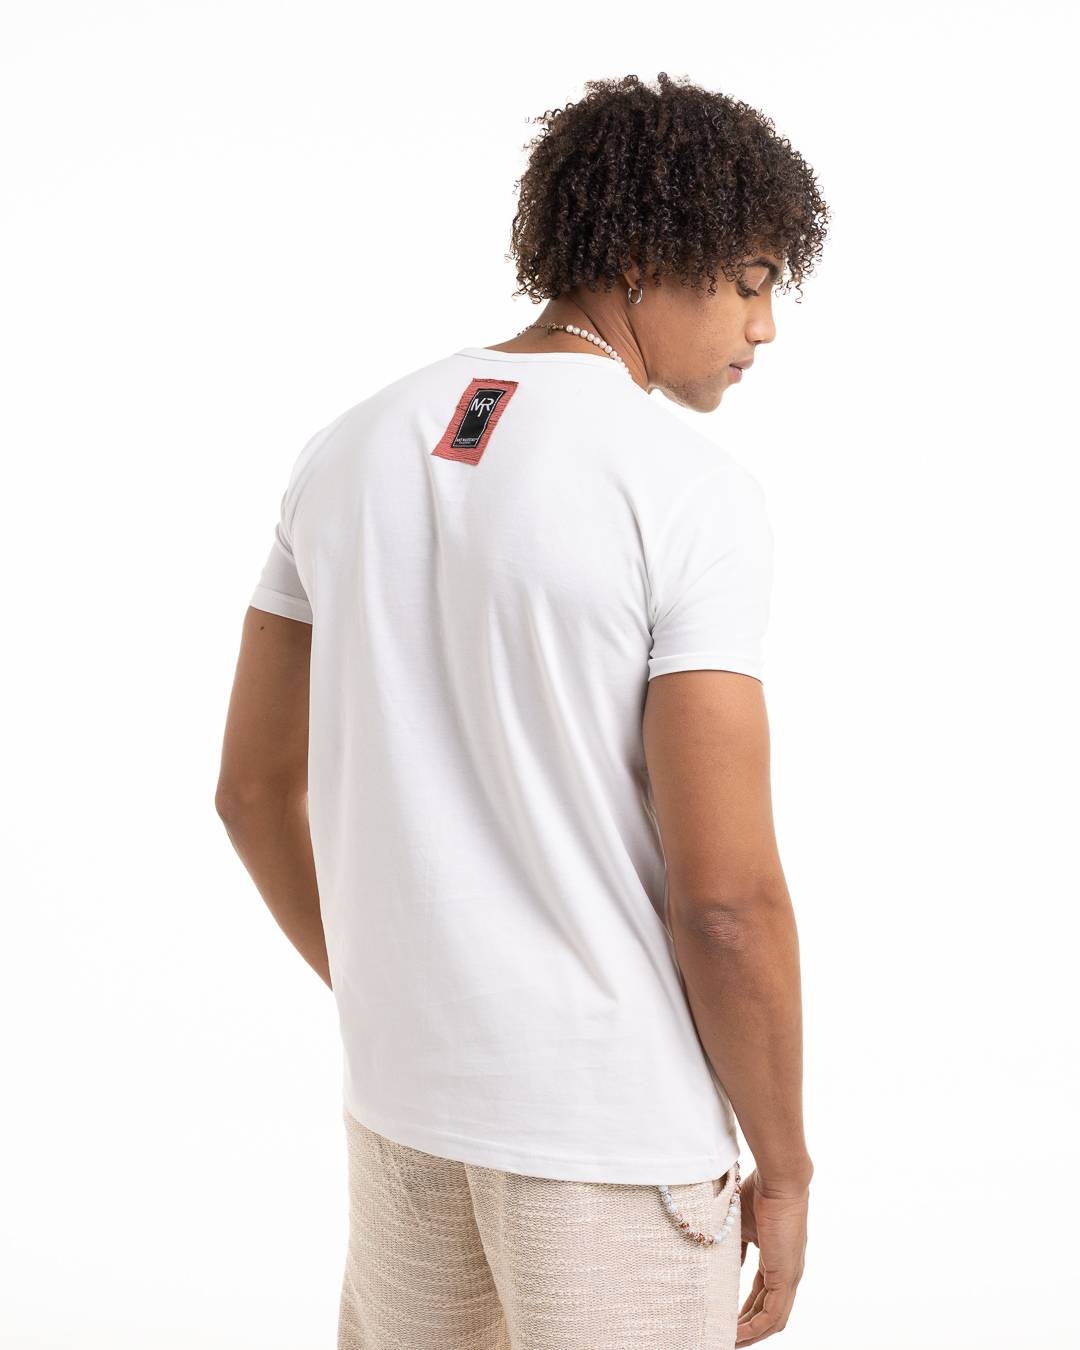 Martini 'Jeans' Embroidery T-shirt - White